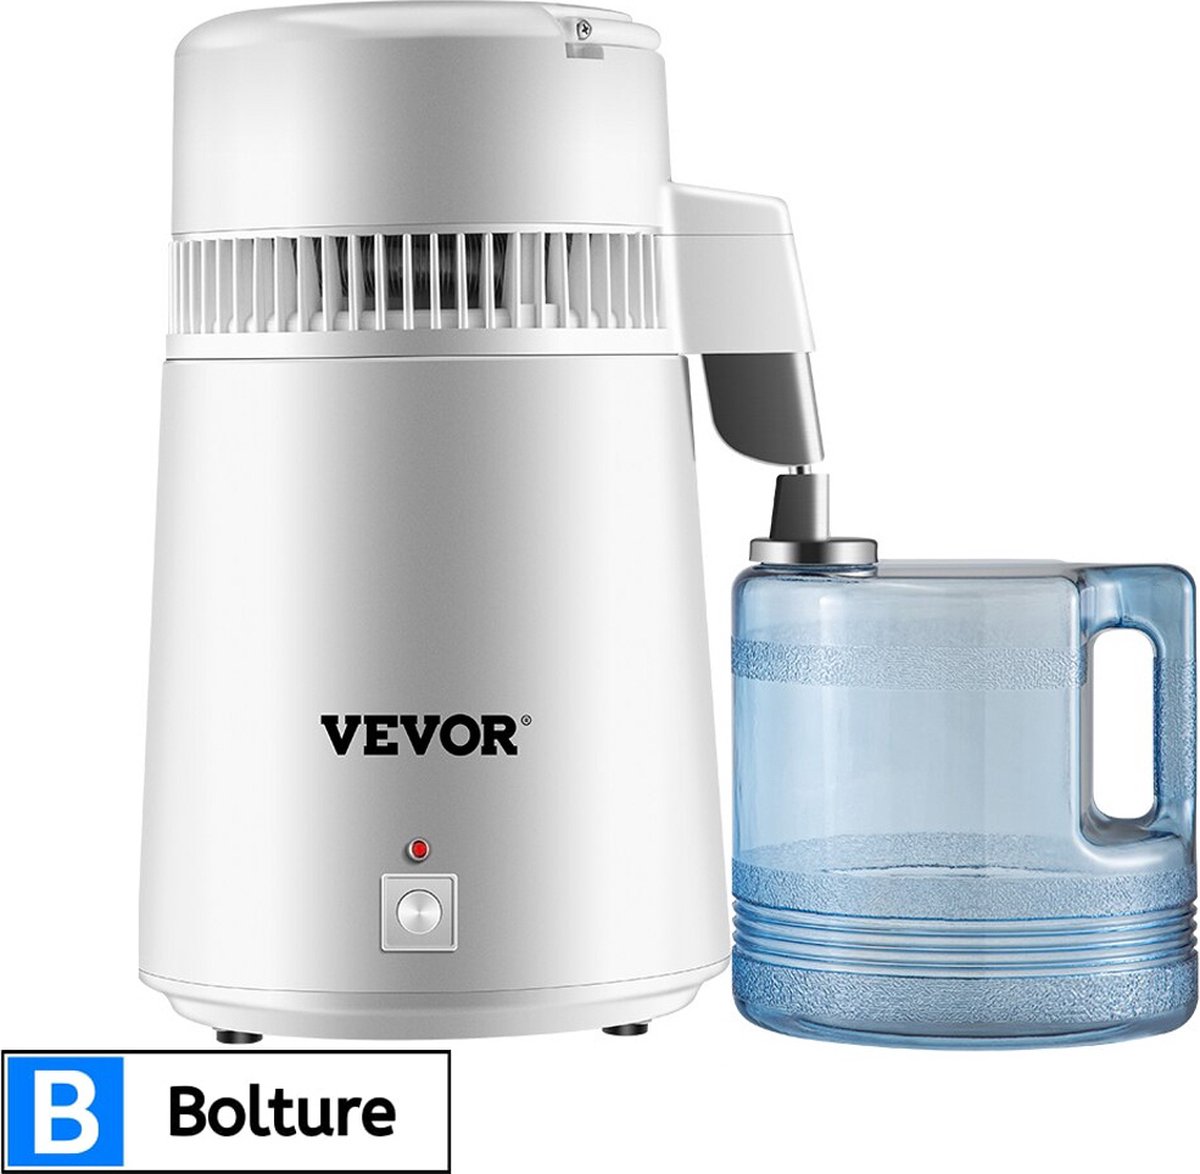 Bolture Waterzuiveringsapparaat - Waterfilter - Waterzuiveringssysteem - Water Destilleerapparaat - Waterzuivering - 4L